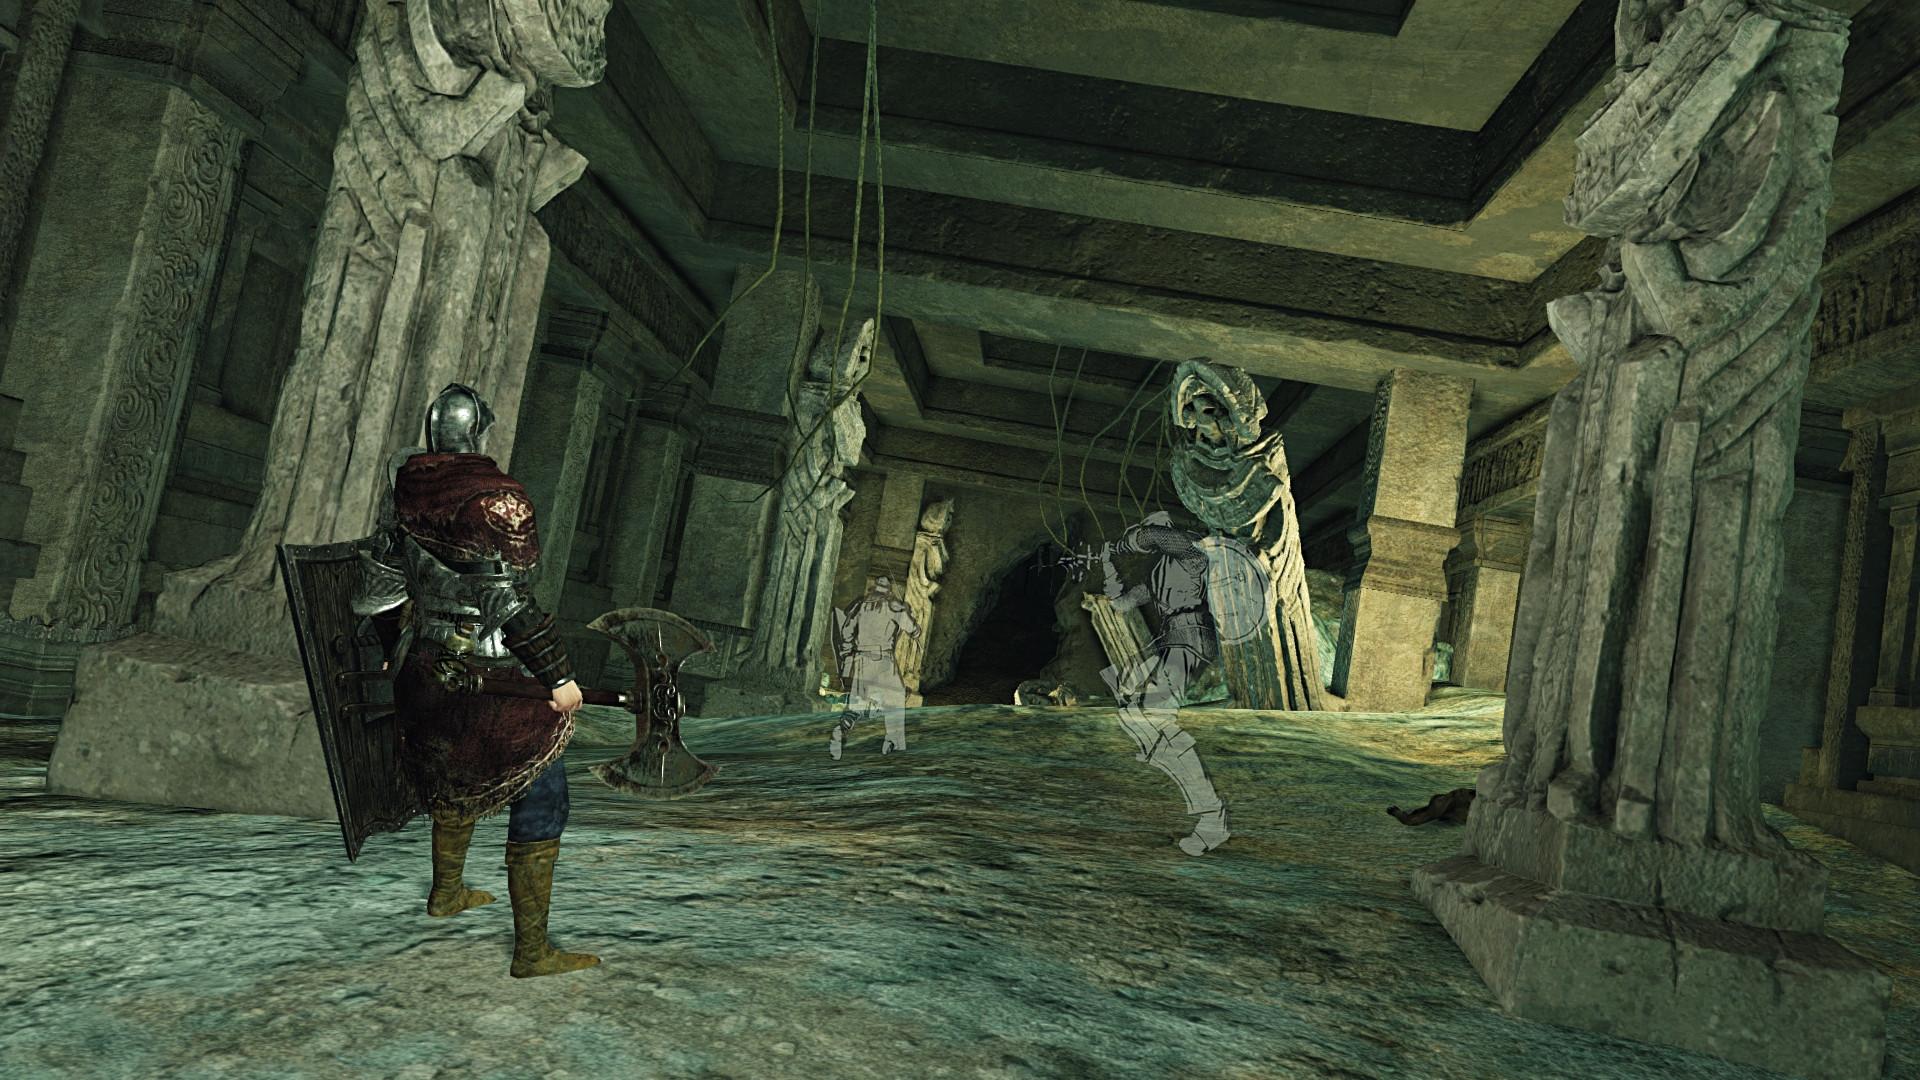 Demon's Souls remaster confirmed for PC too